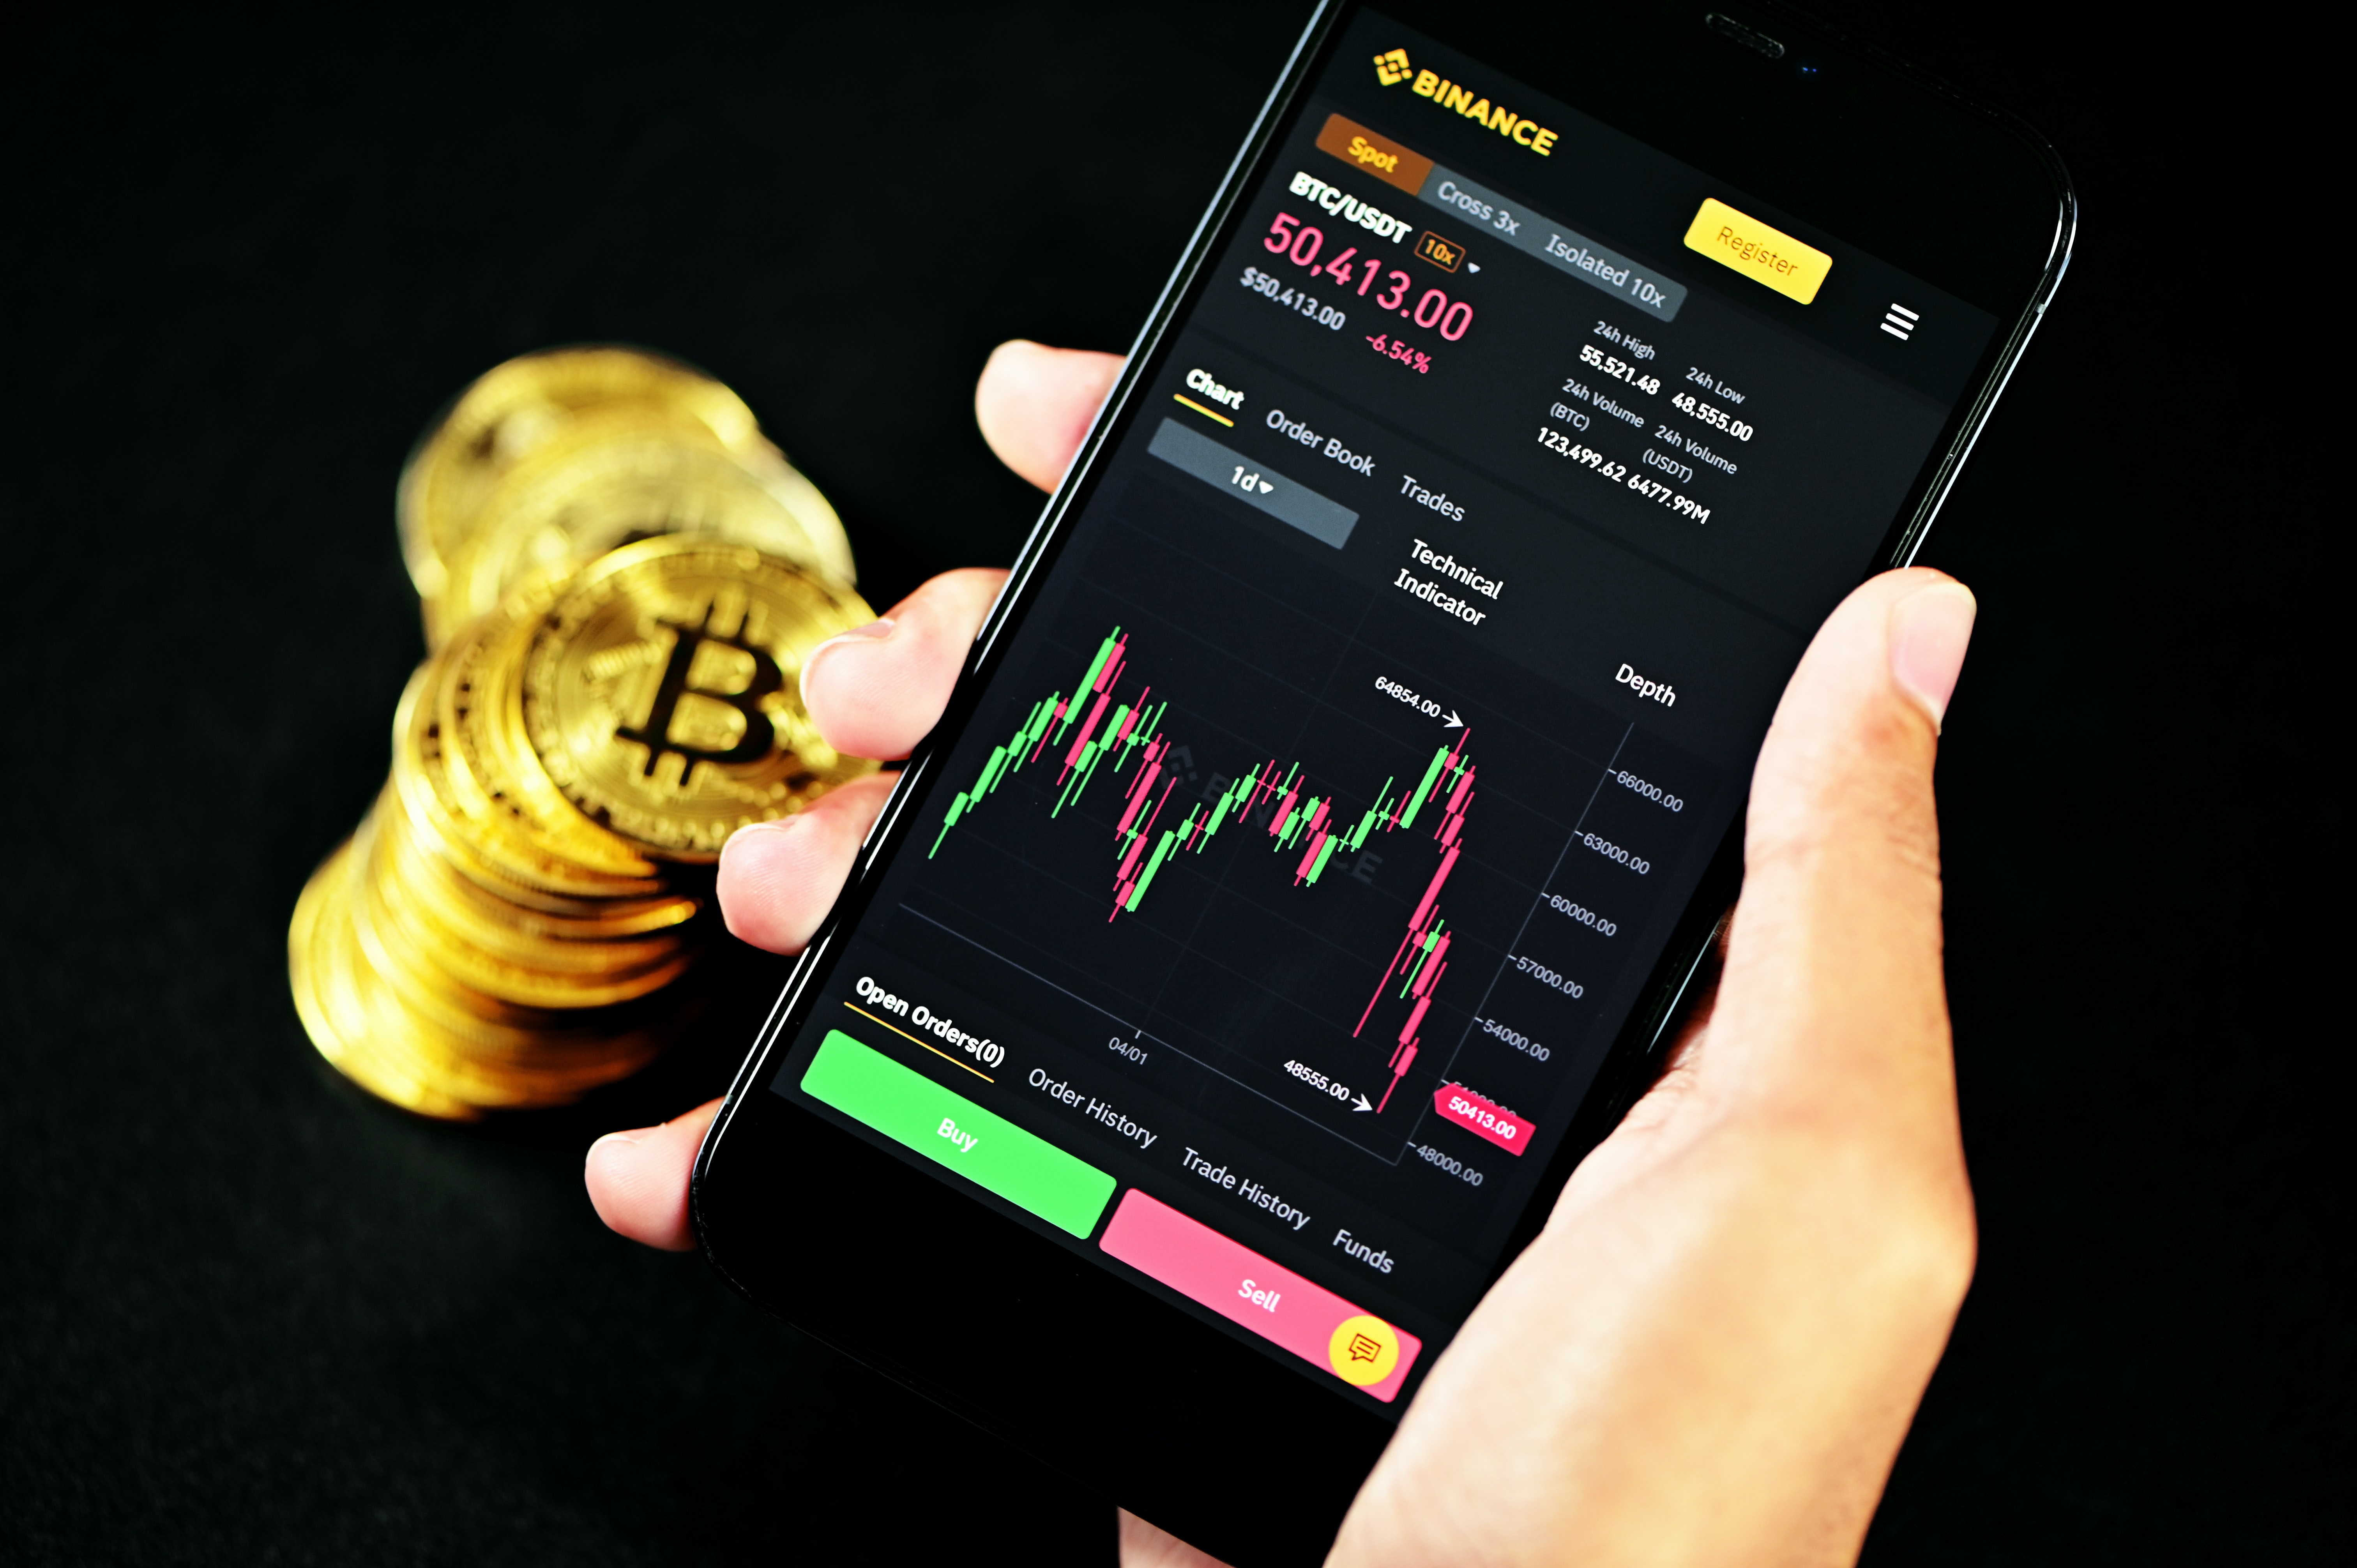 Binance Halts Trading Due to Software Issue